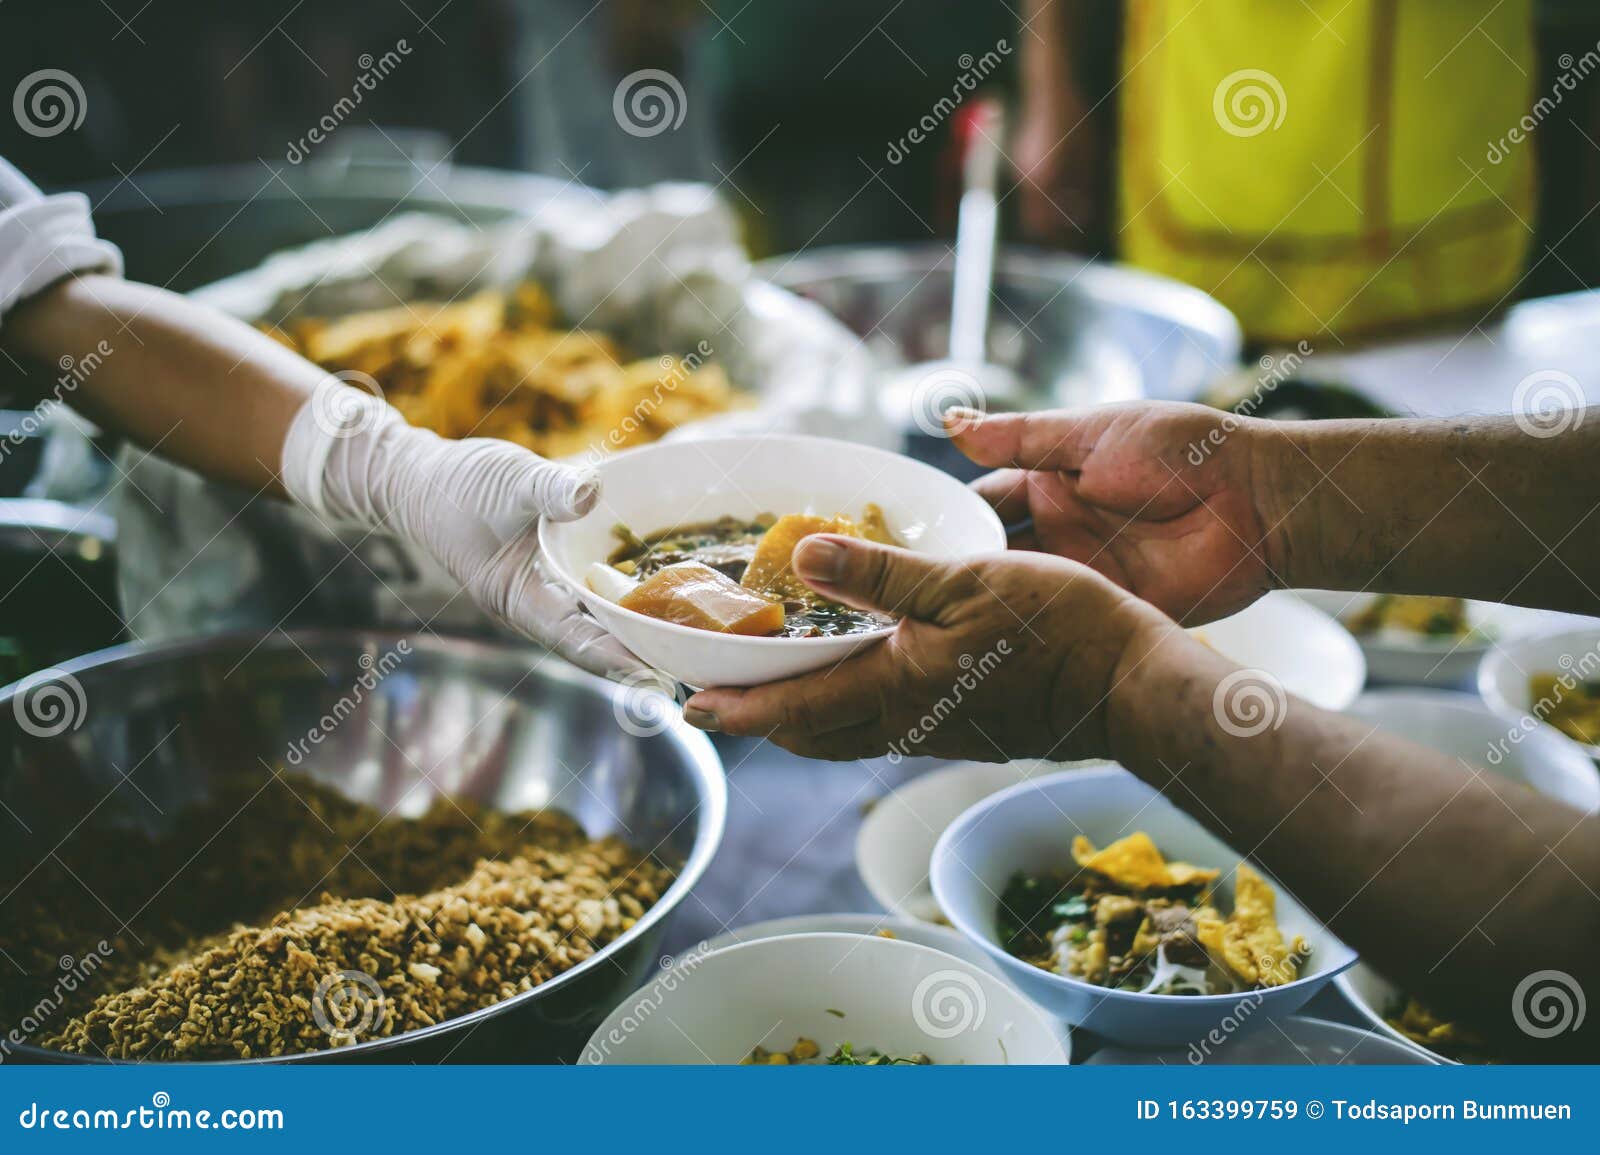 Free Food Distribution Photos - 3 : This includes images of vegetables ...